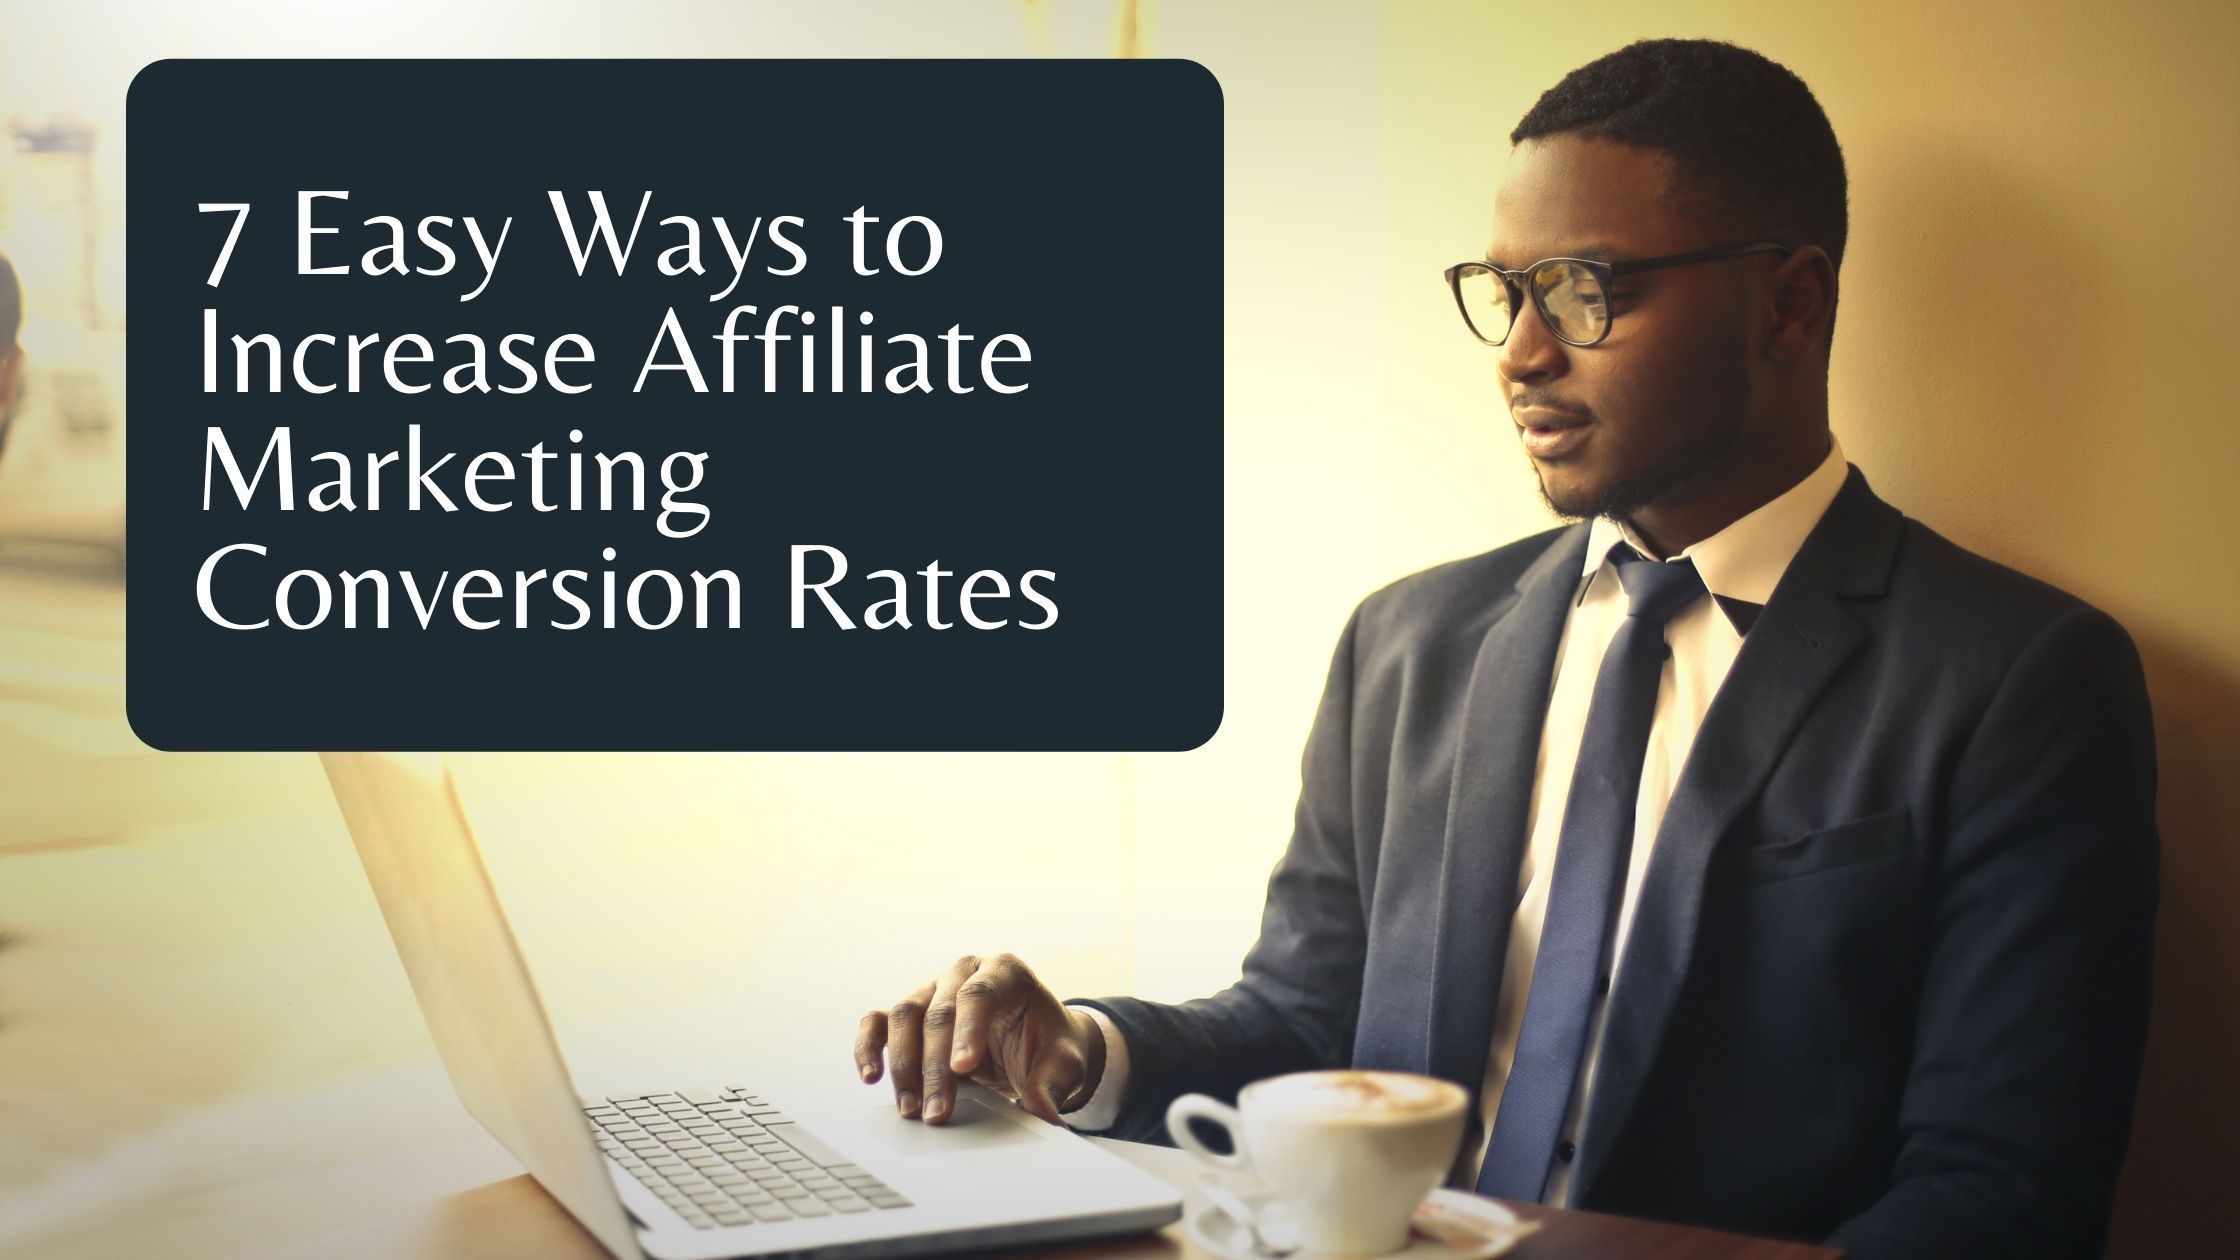 Optimizing your affiliate marketing campaigns for higher conversion rates will maximize your commission earnings by encouraging more users to take action.